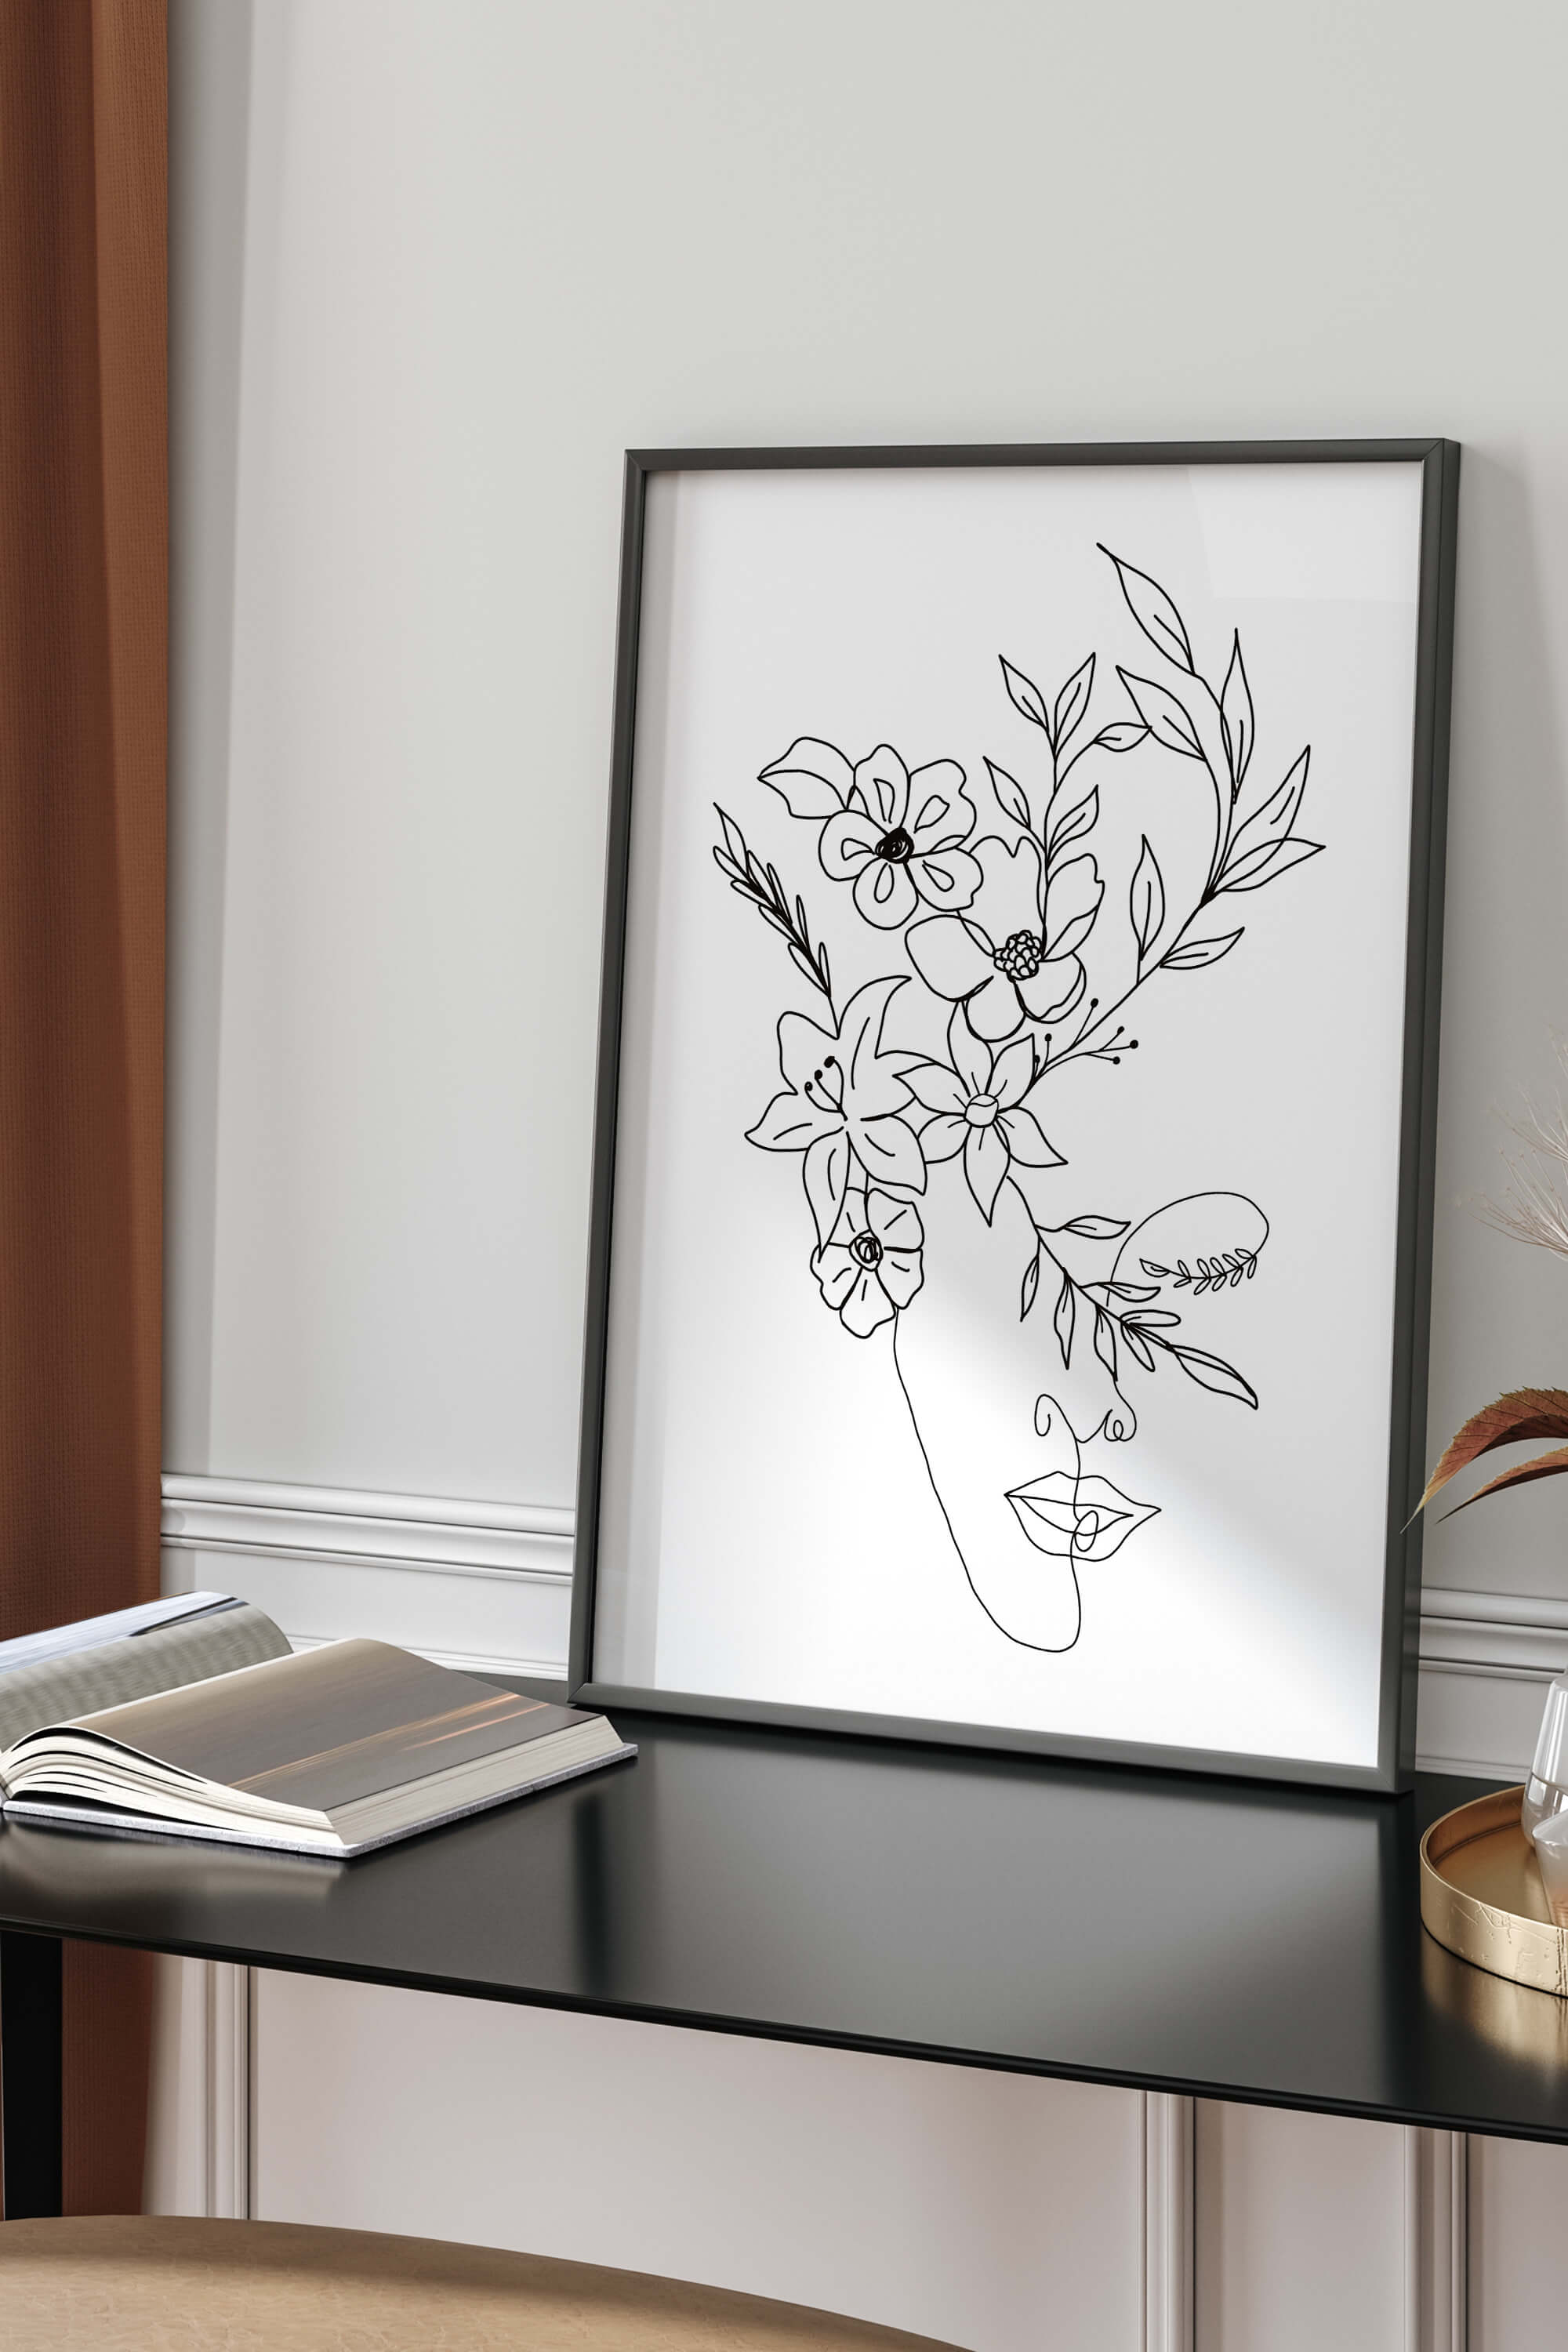 Elegant bedroom wall decor featuring a sophisticated woman. A timeless expression of femininity and grace, this art print adds a touch of the unusual to your living space.